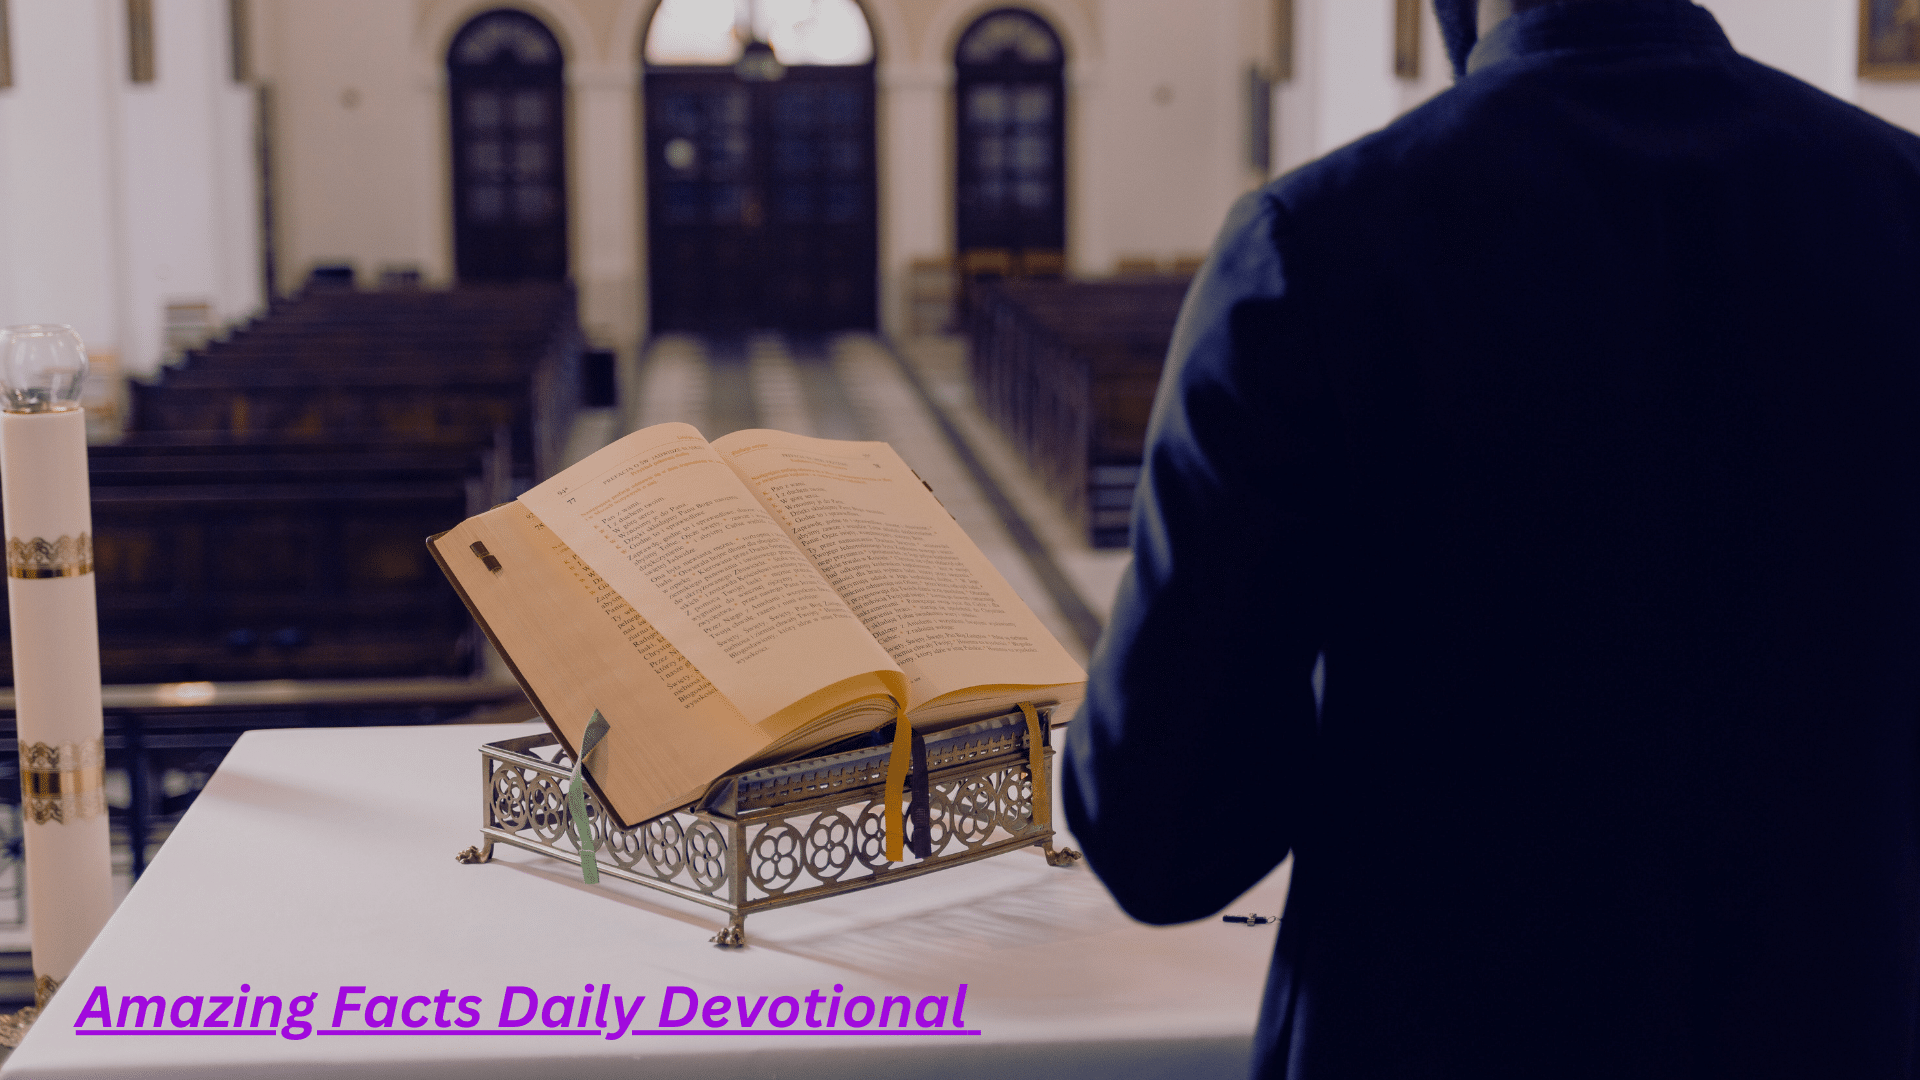 Amazing Facts Daily devotional